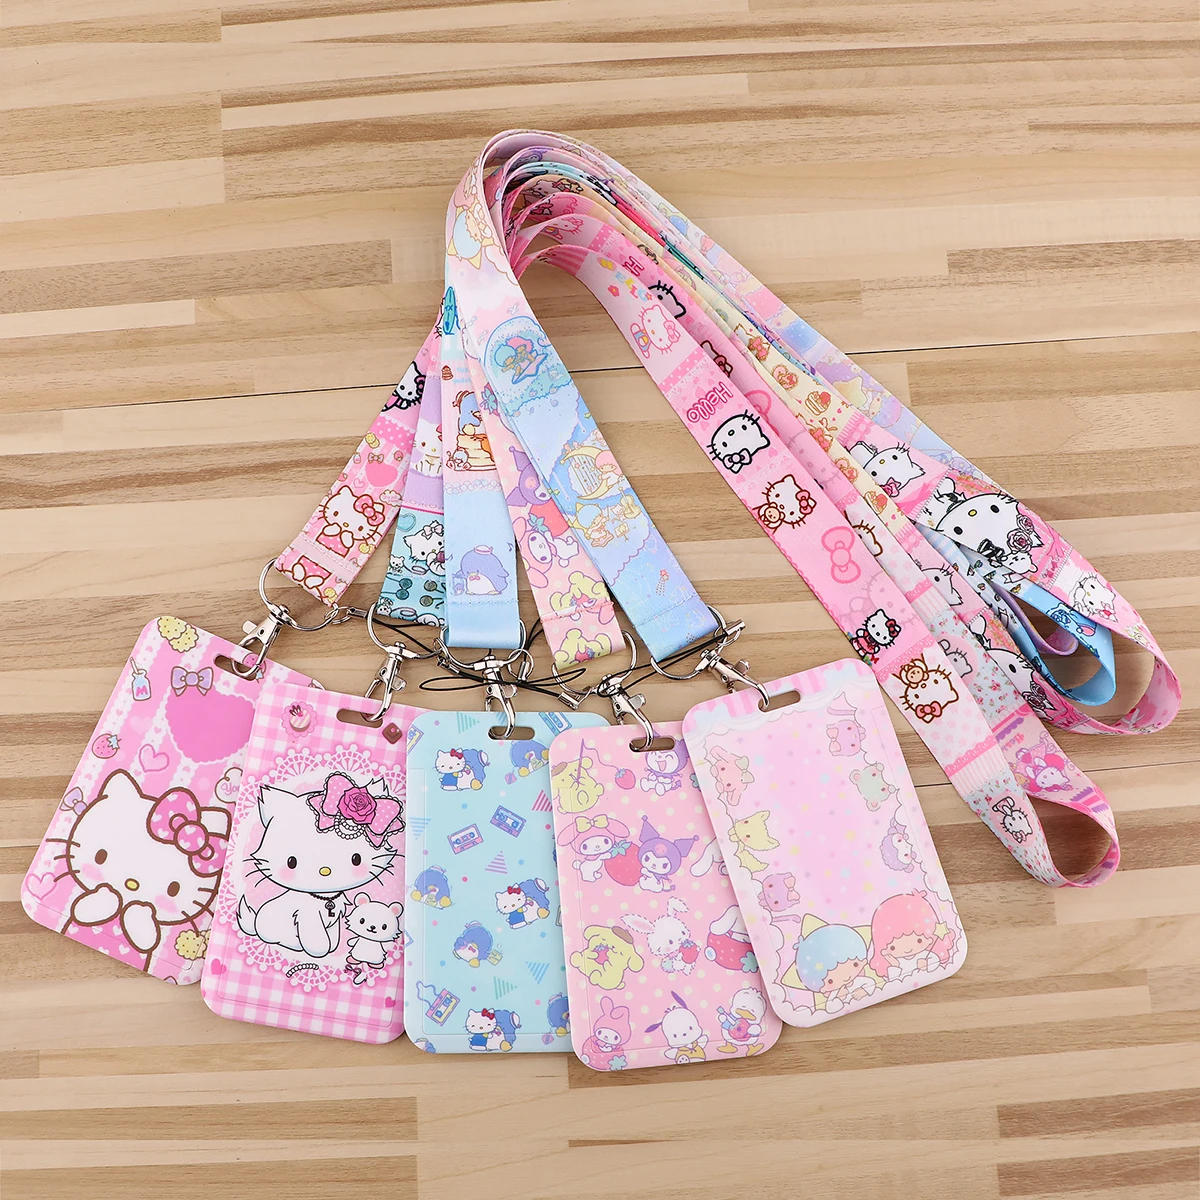 Rabbit Keychain Kawaii Cat Cartoon Anime Lanyards for Key ID Card Gym Cell Phone Strap USB Badge Holder Accessories Gift p3459 dongmanli prince and fox lanyards keychain id card pass gym mobile phone badge key ring holder neck straps accessories